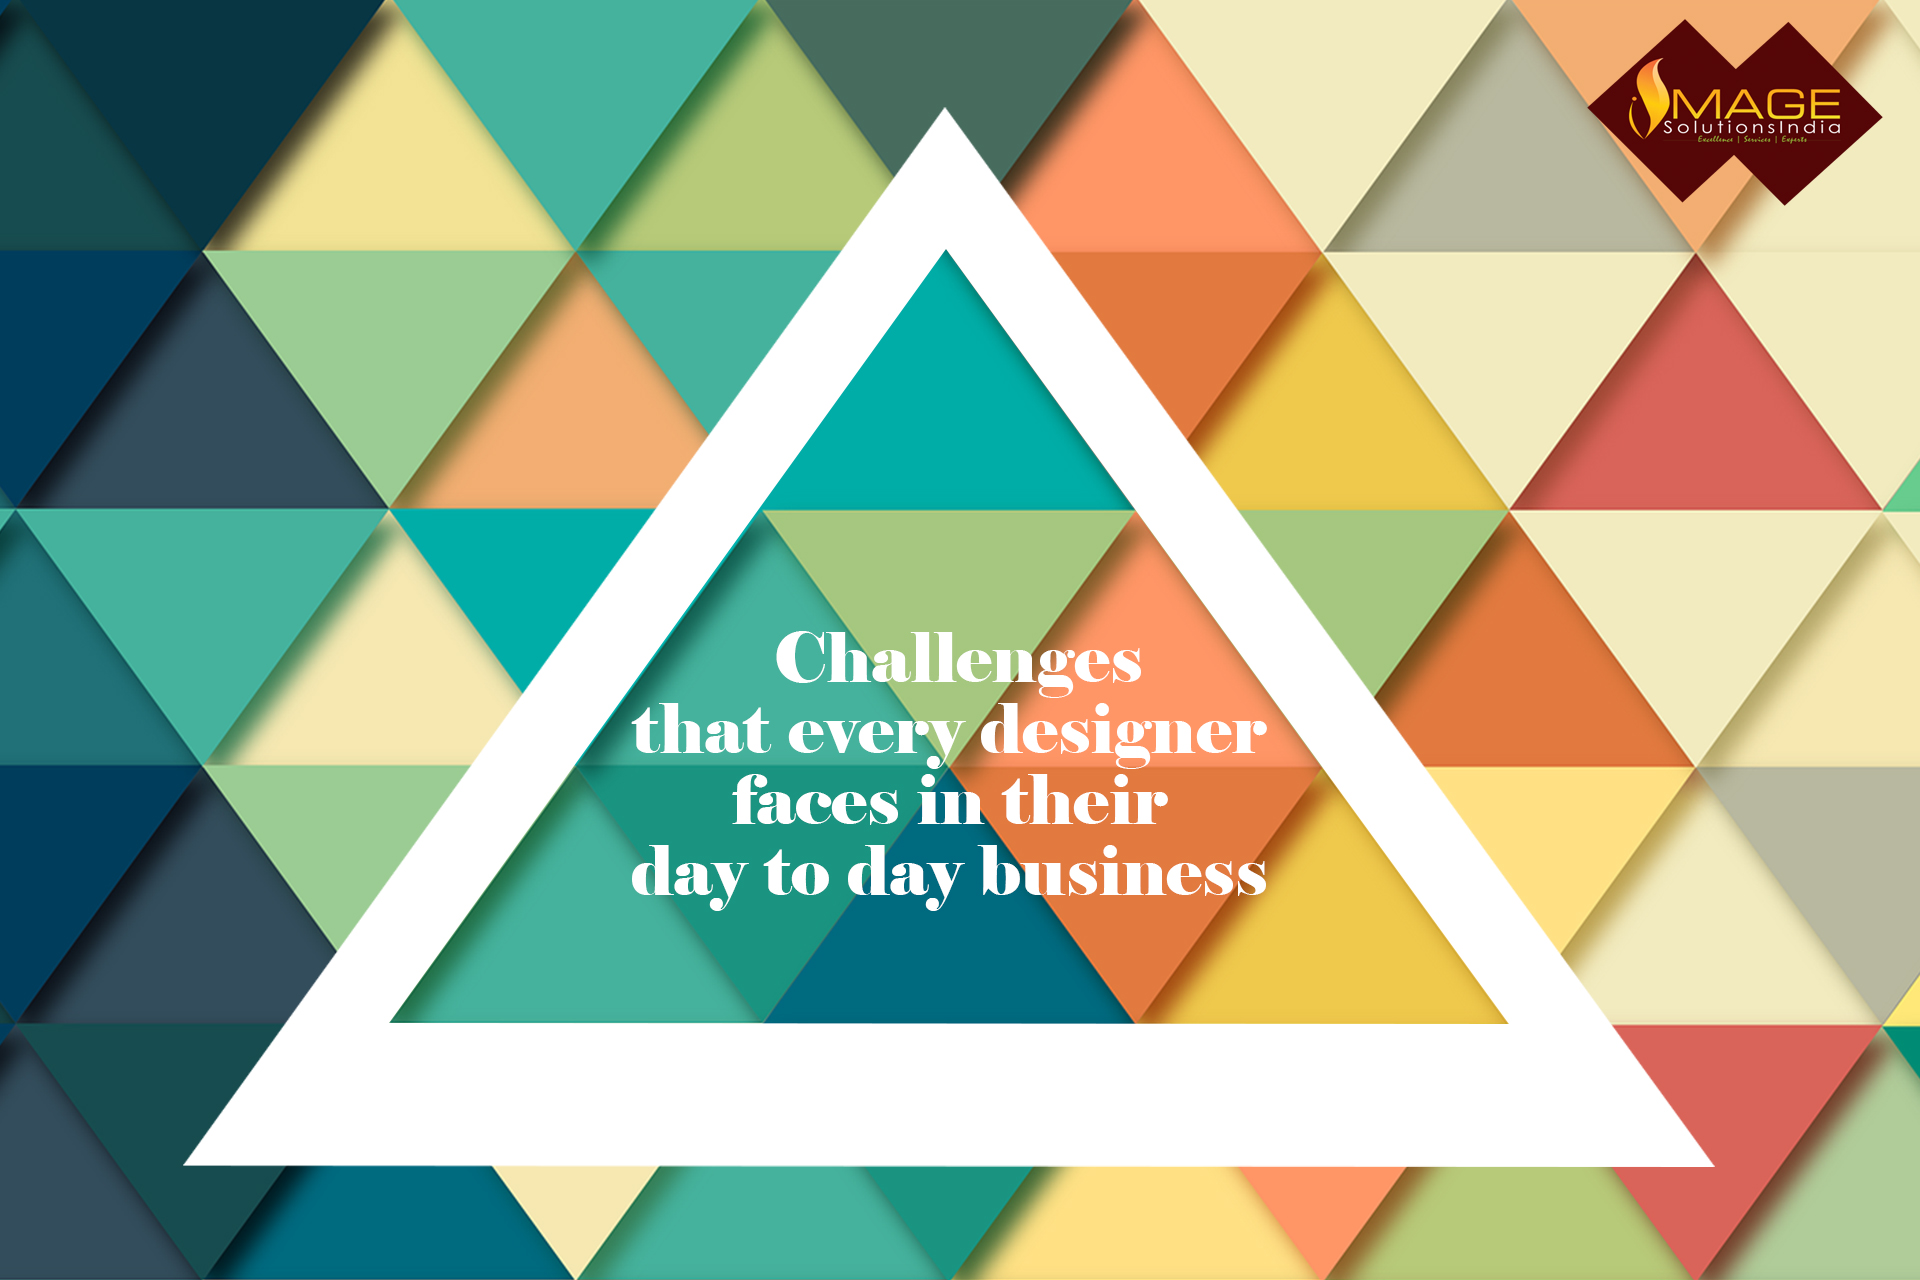 Challenges that every designer faces in their day to day business